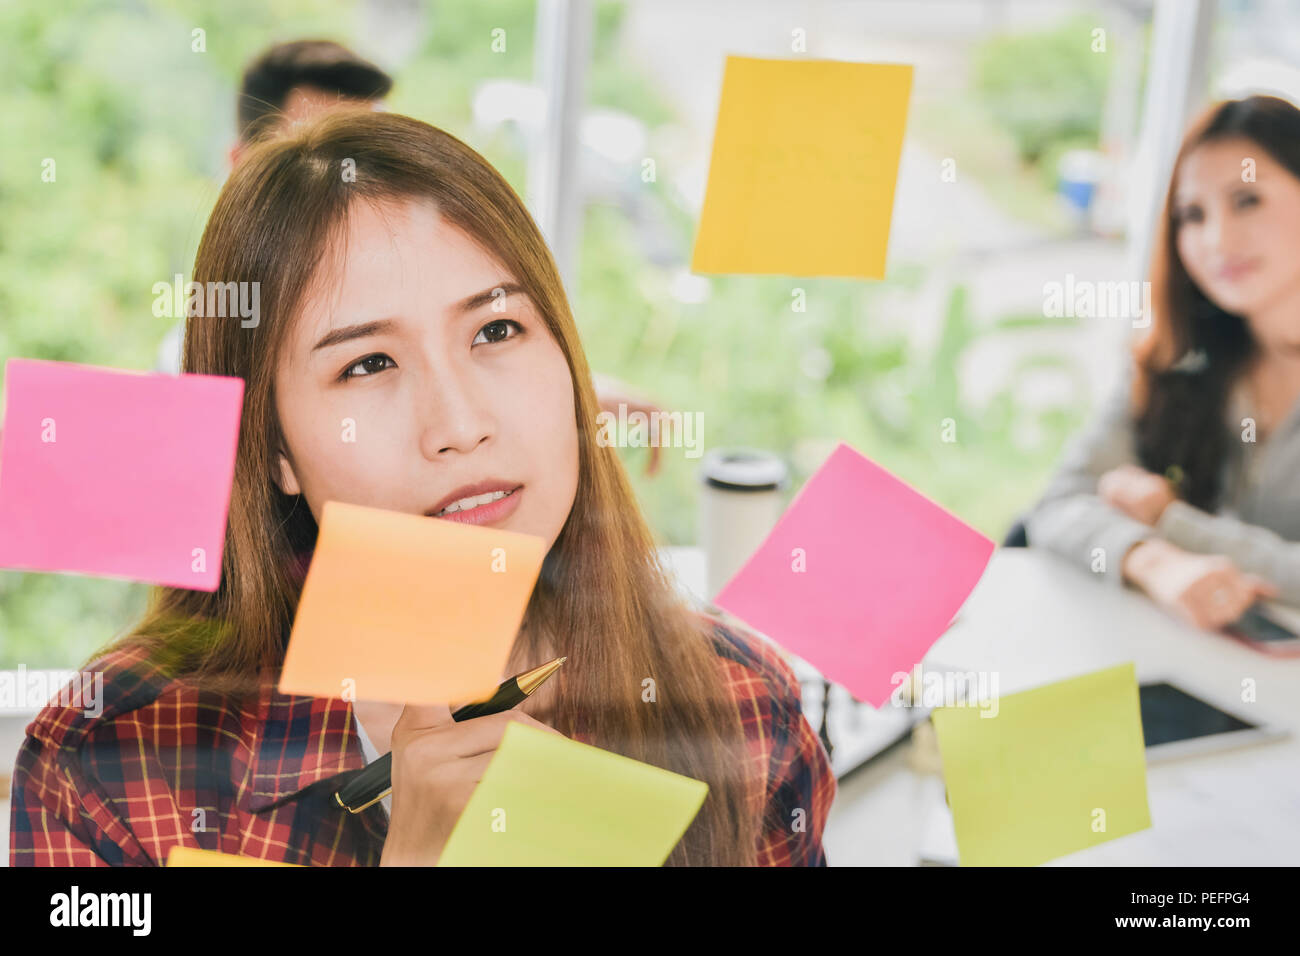 Thoughtful businesswoman looking at sticky notes stuck and thinking on glass wall in creative office Stock Photo